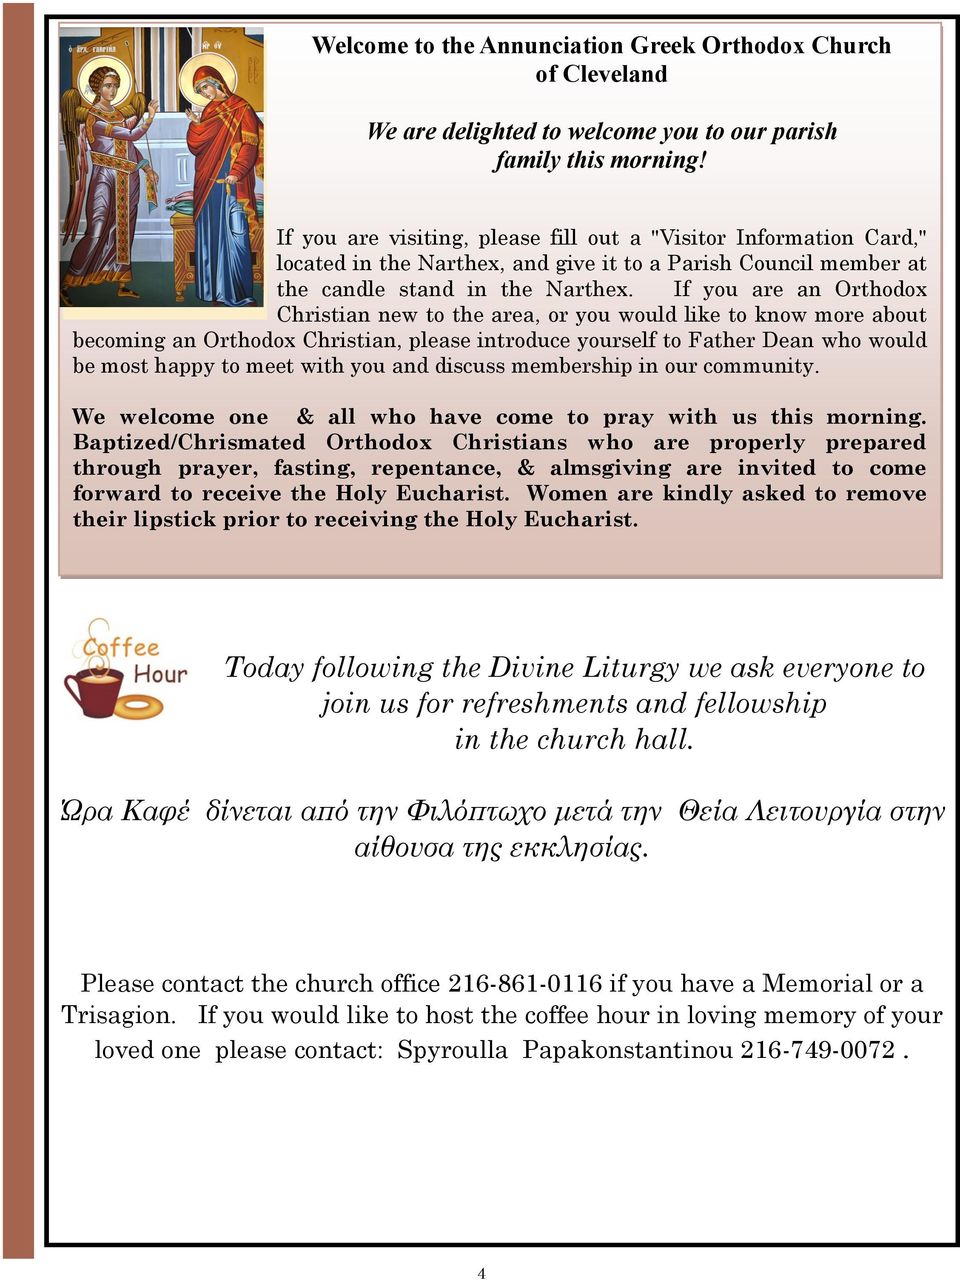 If you are an Orthodox Christian new to the area, or you would like to know more about becoming an Orthodox Christian, please introduce yourself to Father Dean who would be most happy to meet with